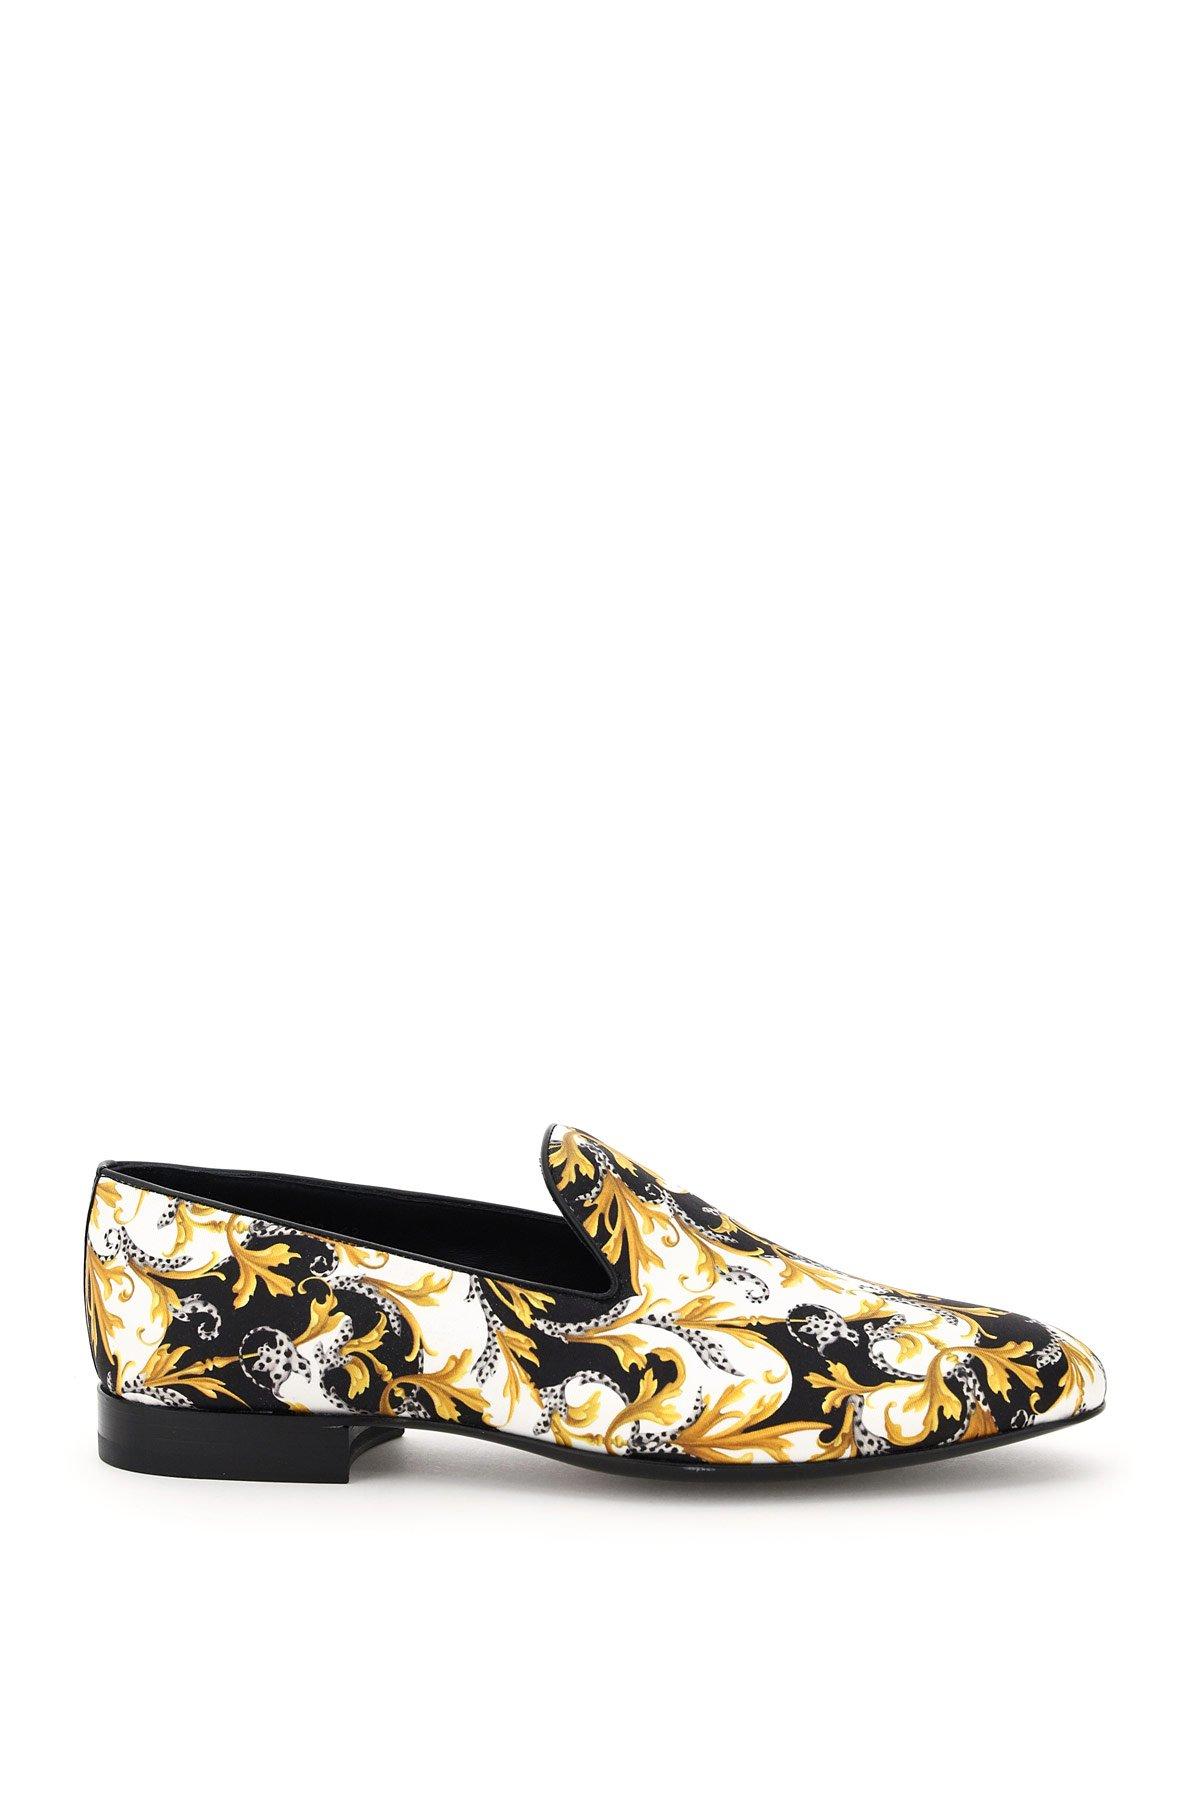 Versace Baroque-print Silk Loafers in Yellow for Men Mens Shoes Slip-on shoes Loafers 